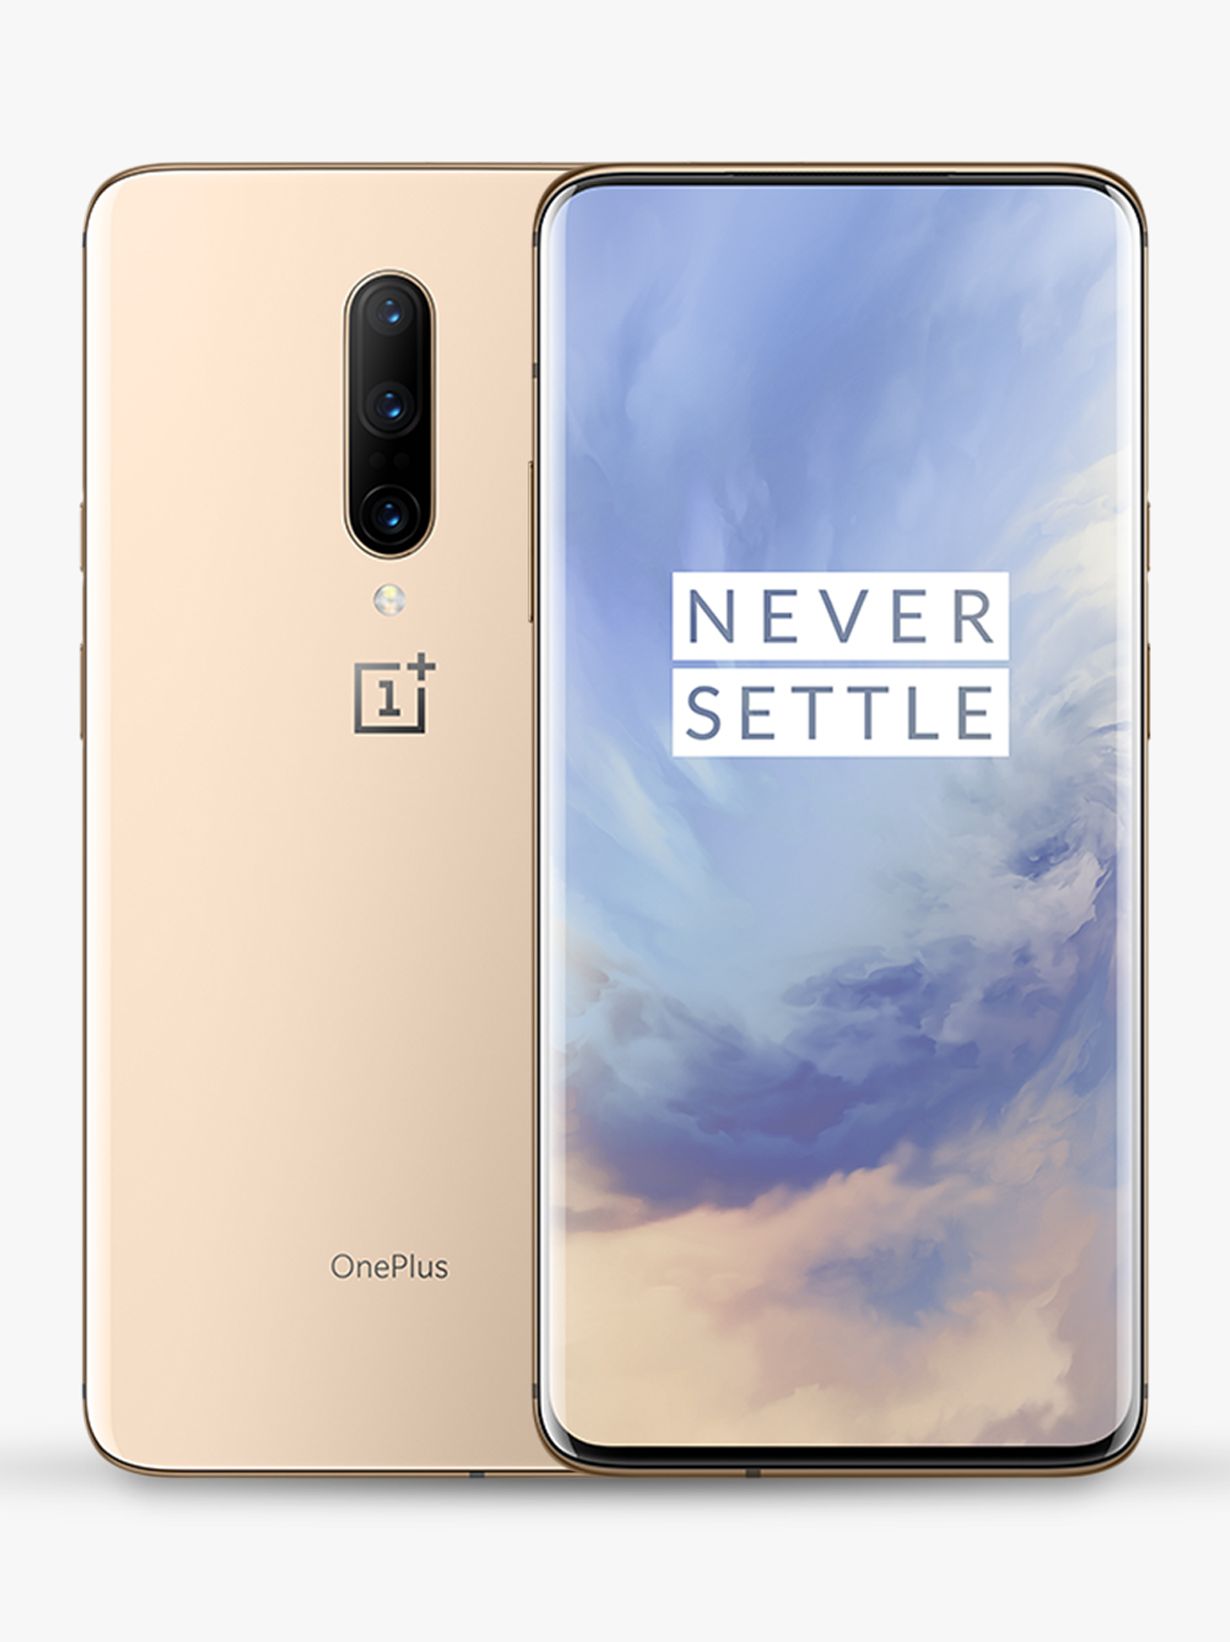 OnePlus 7 Pro Smartphone, Android, 6.67", 4G LTE, SIM Free ...